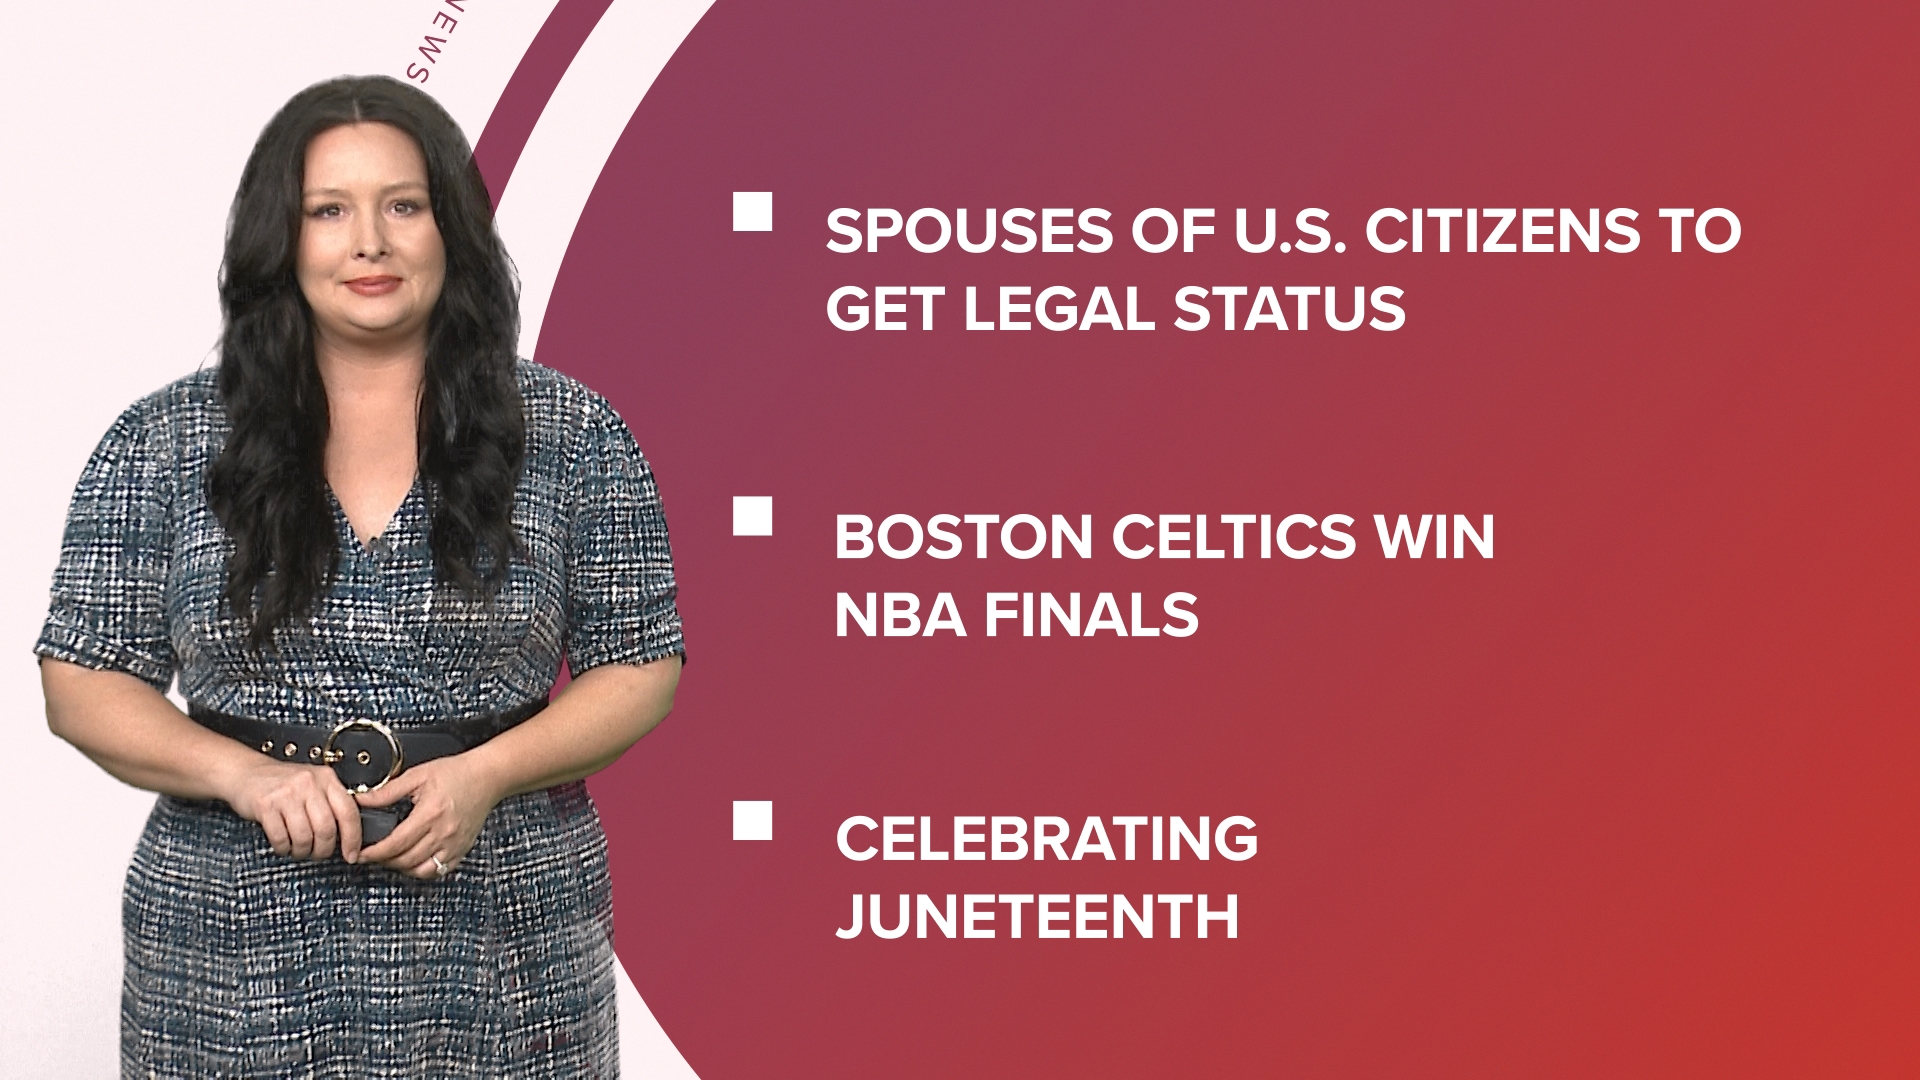 A look at what is happening in the news from Pres. Biden's new rule impacting undocumented spouses to celebrating Juneteenth and Celtics win NBA Championship.